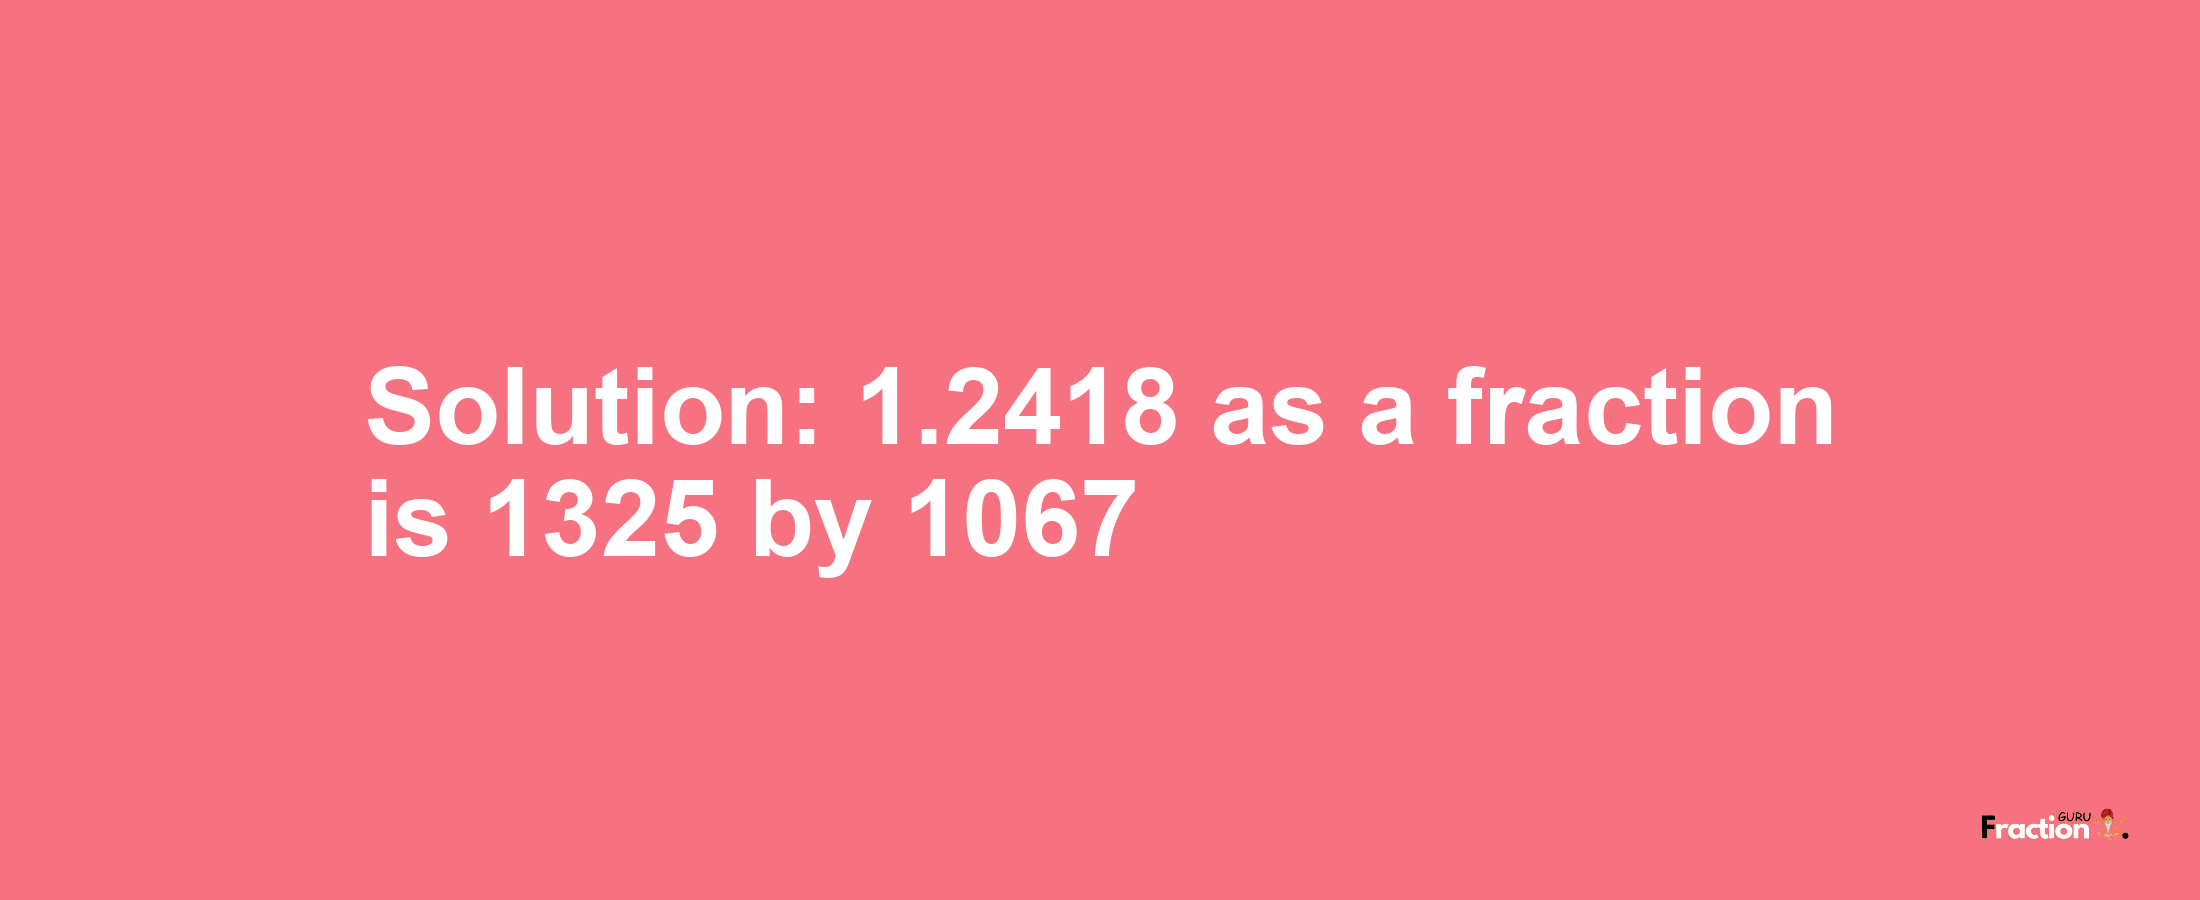 Solution:1.2418 as a fraction is 1325/1067